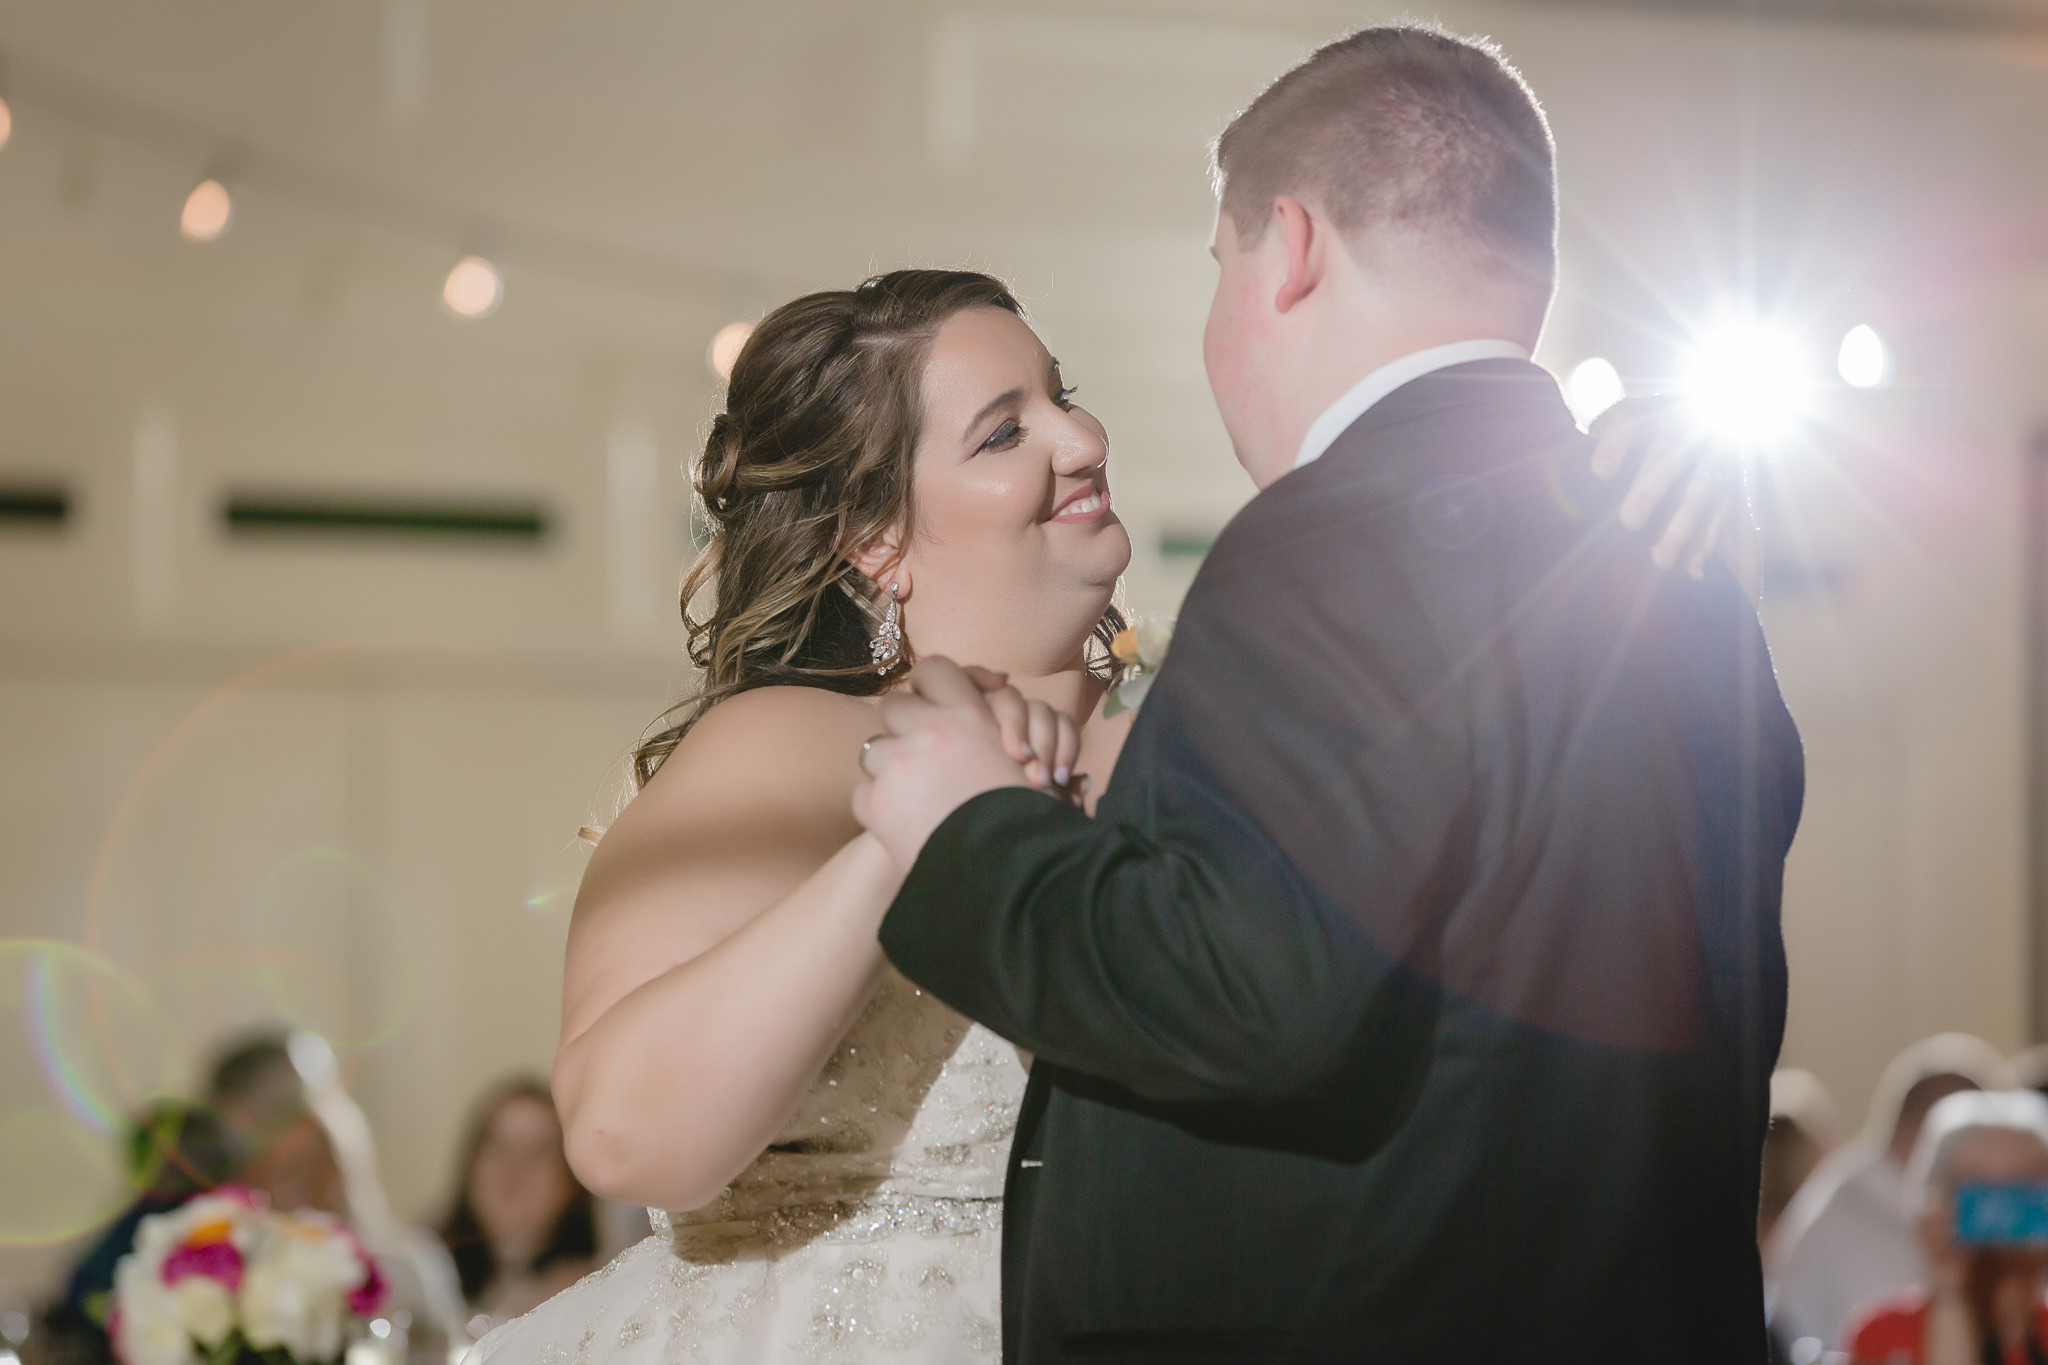 Bride & groom's first dance at Soldiers & Sailors wedding reception